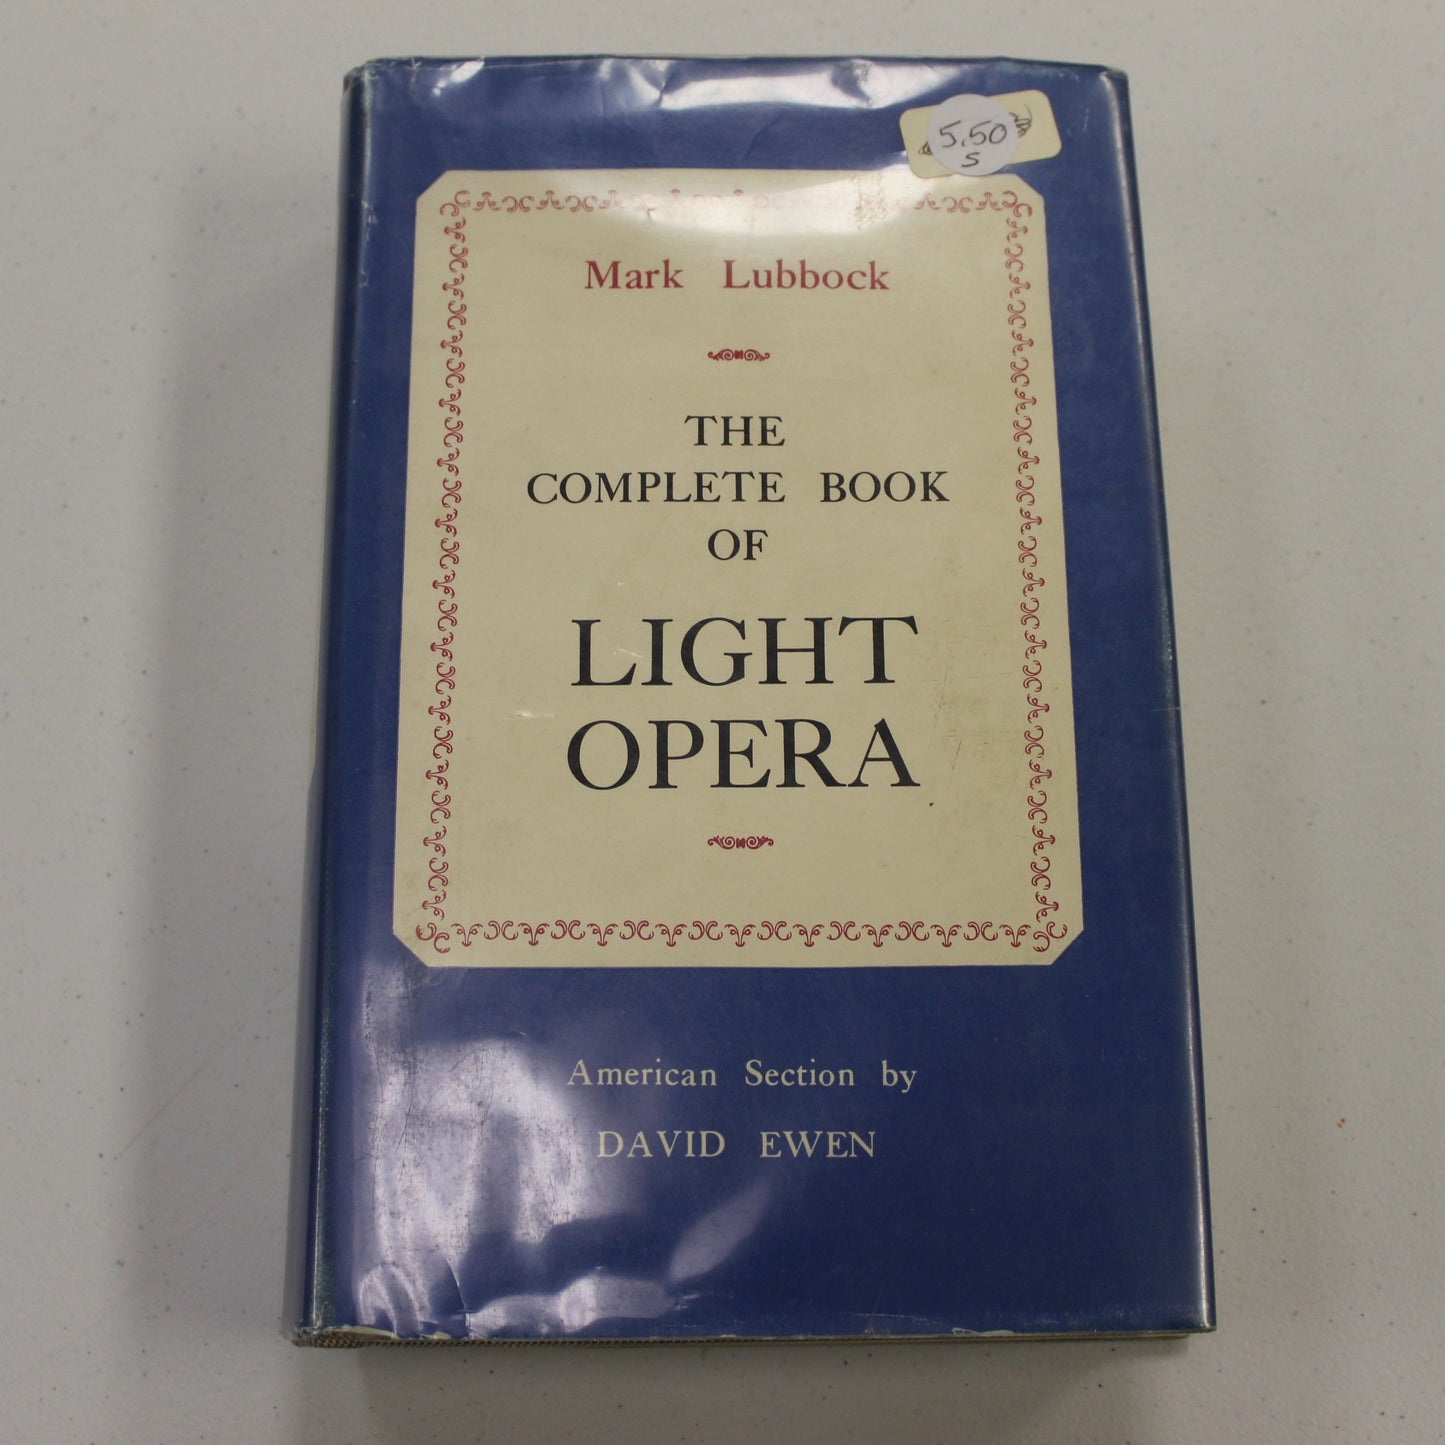 THE COMPLETE BOOK OF LIGHT OPERA